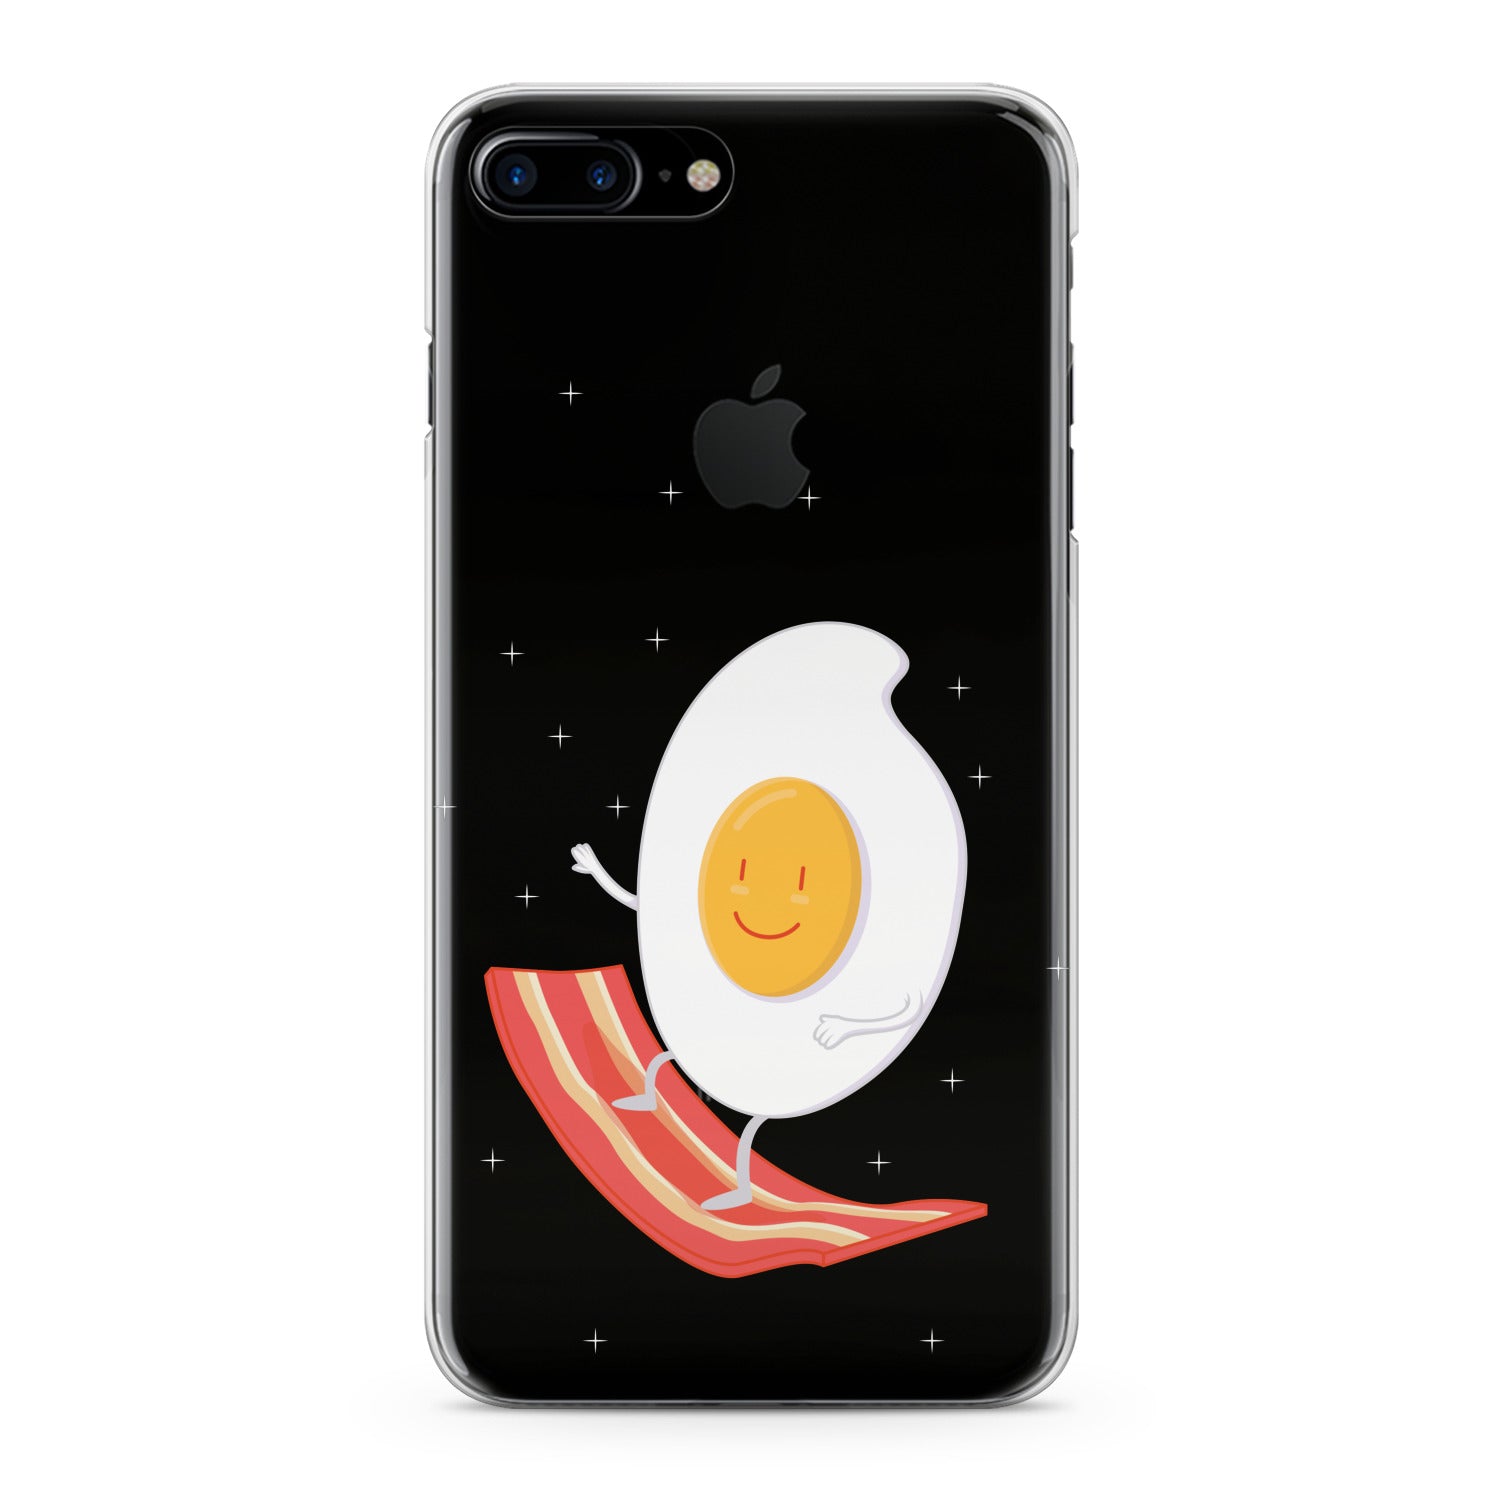 Lex Altern Egg Bacon Surfing Phone Case for your iPhone & Android phone.